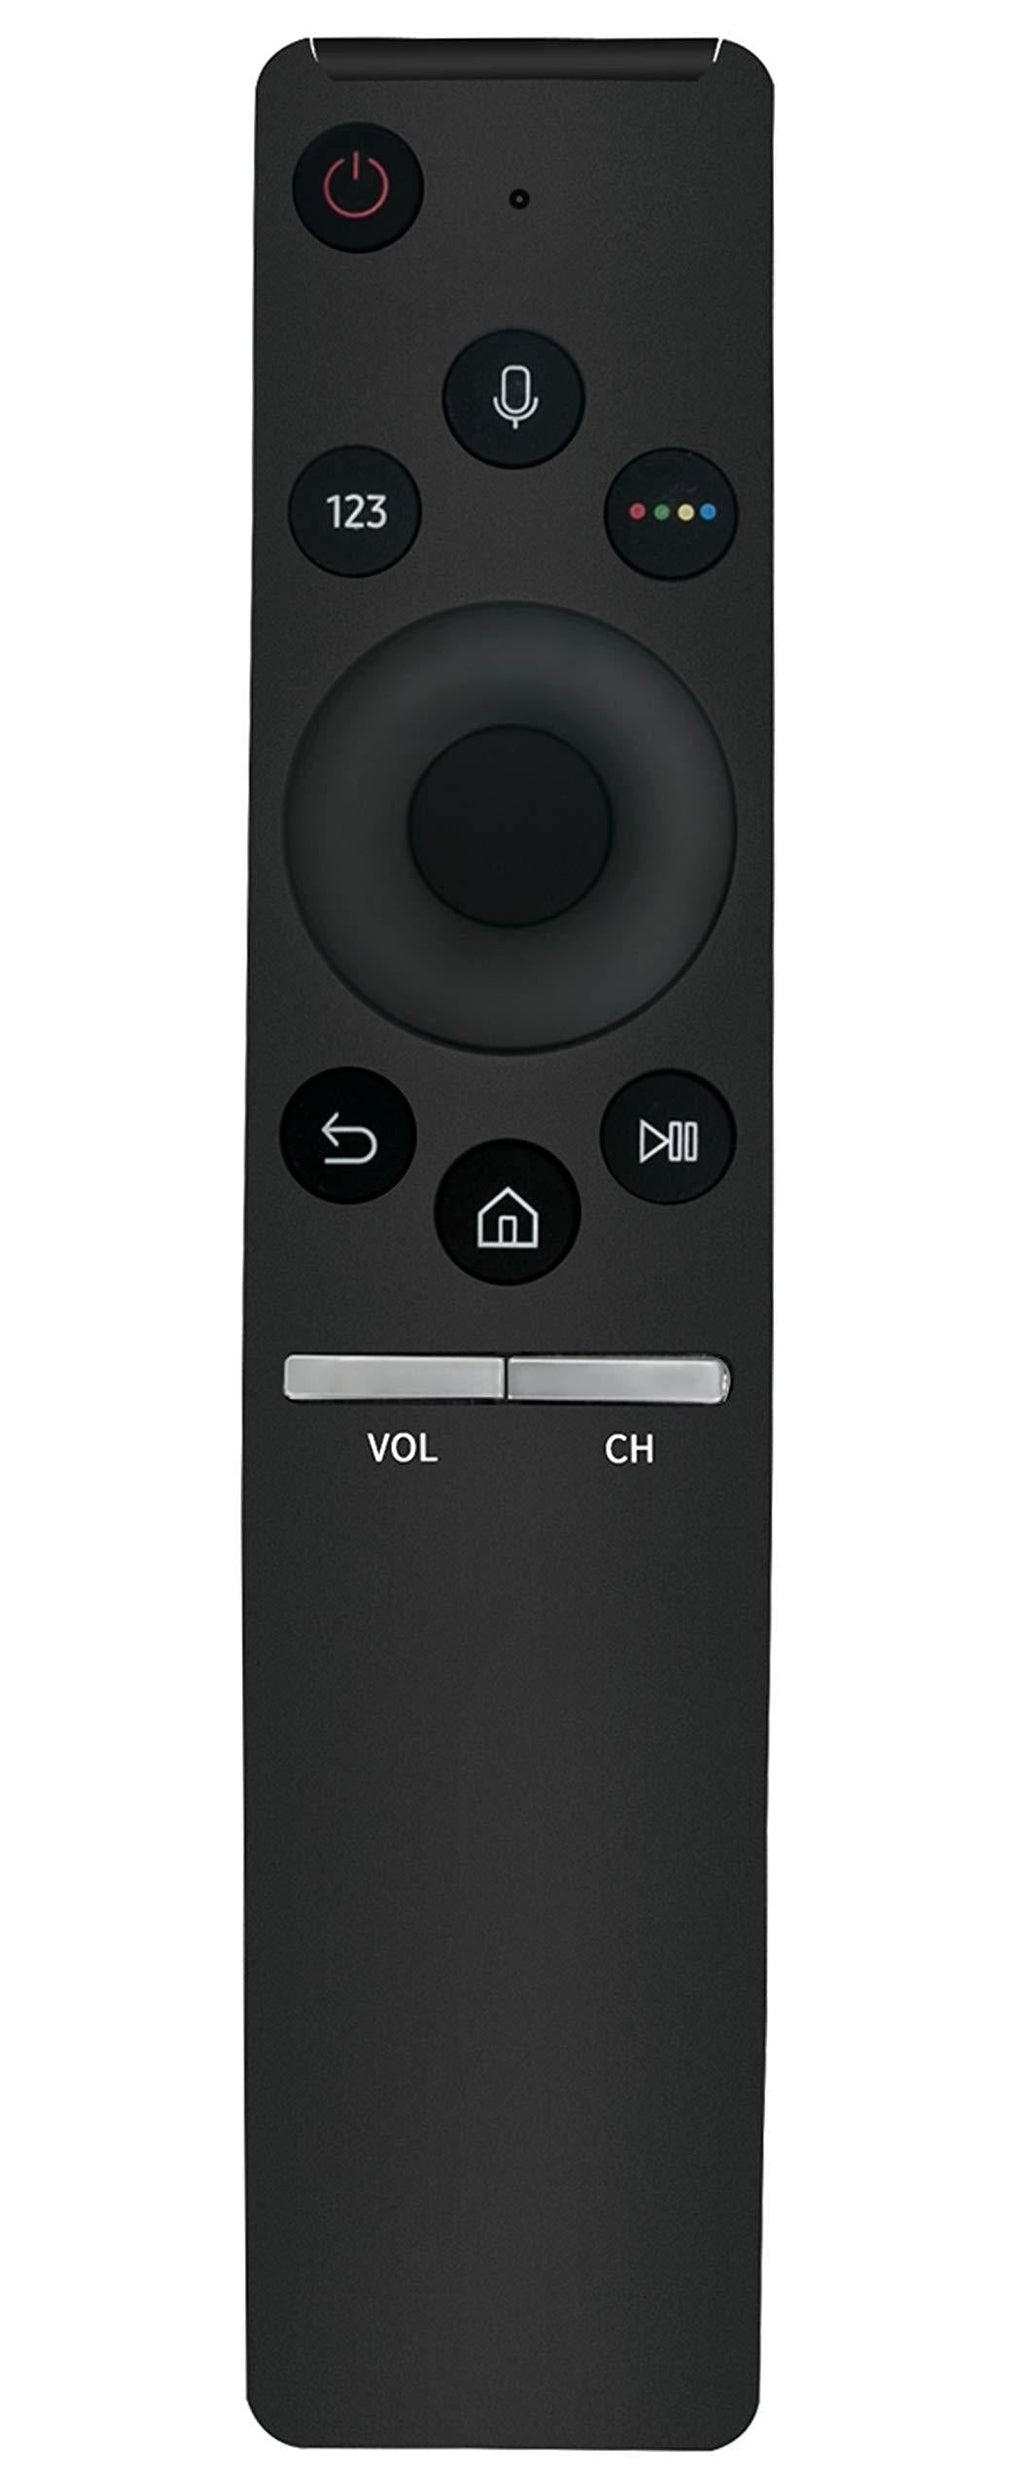 Voice Remote Replacement fit for Samsung TV BN59-01265A QN55Q7FAMFXZA QN55Q7FDMFXZA QN55Q8CAMFXZA QN65Q7C QN65Q7CAMF QN65Q7CAMFXZA QN65Q7CDMFXZA QN65Q7FAMF QN65Q7FAMFXZA QN65Q7FDMFXZA QN65Q8CAMF - LeoForward Australia